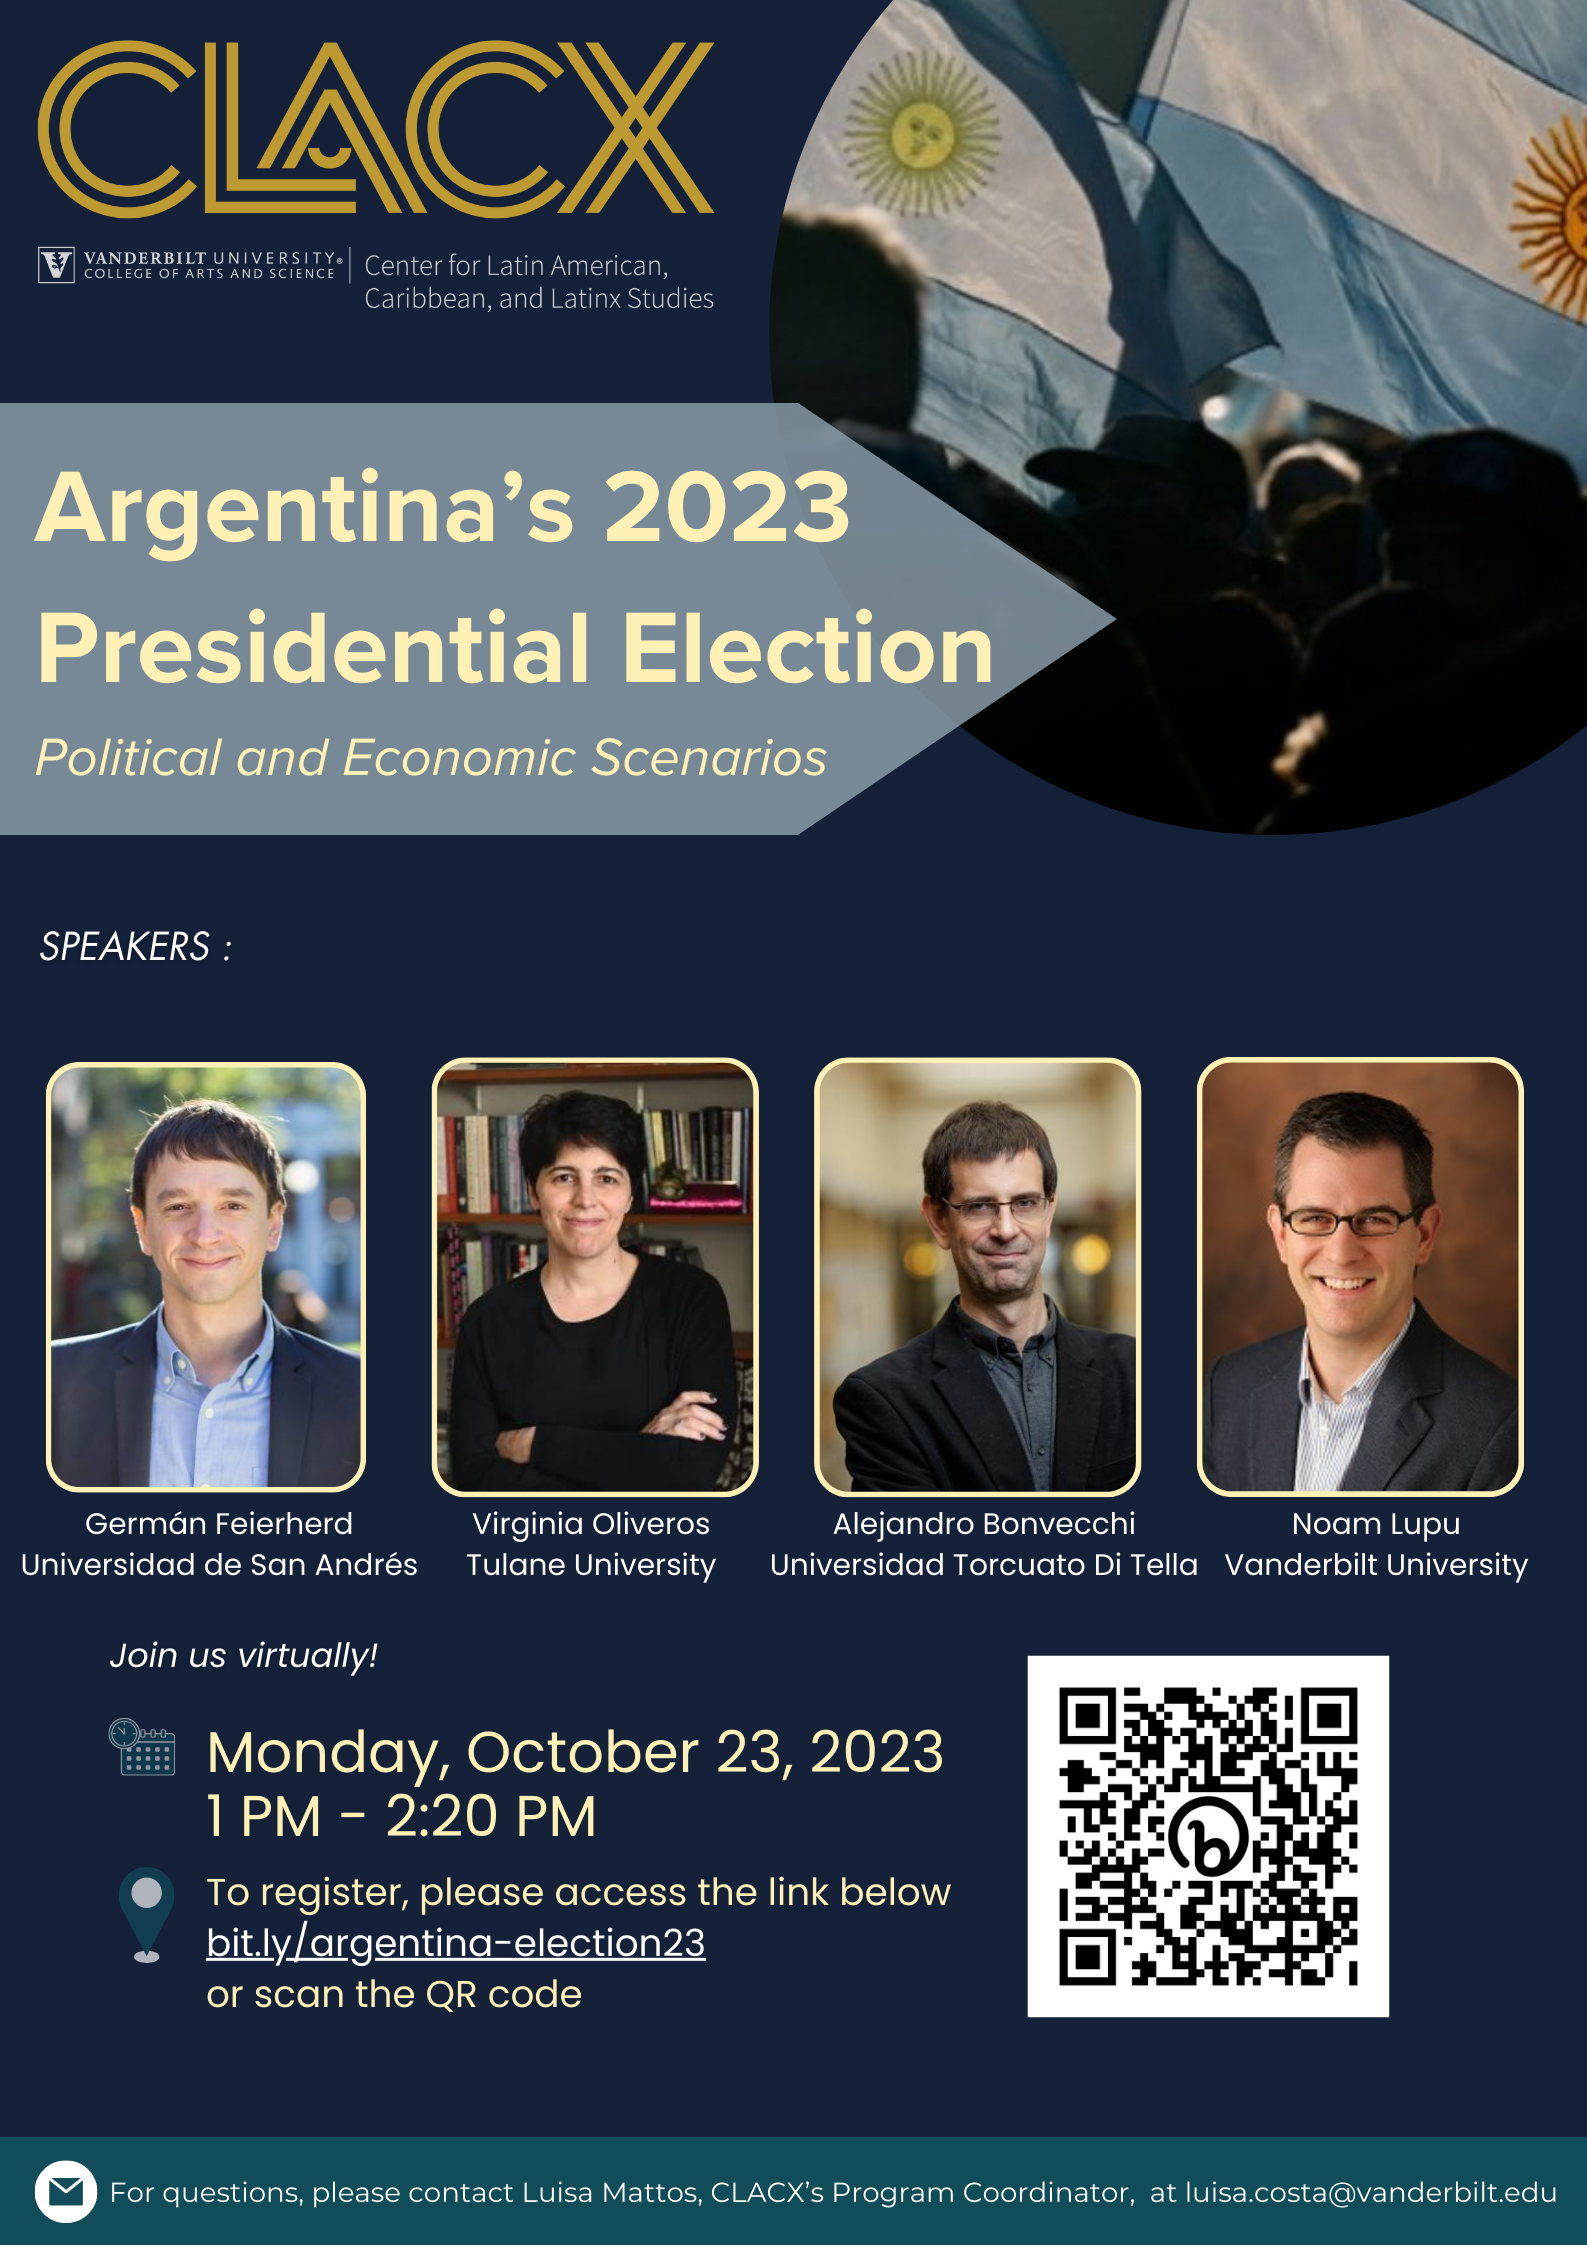 Argentina’s 2023 Presidential Election: Political and Economic Scenarios. Join us virtually on October 23 at 1 p.m.!